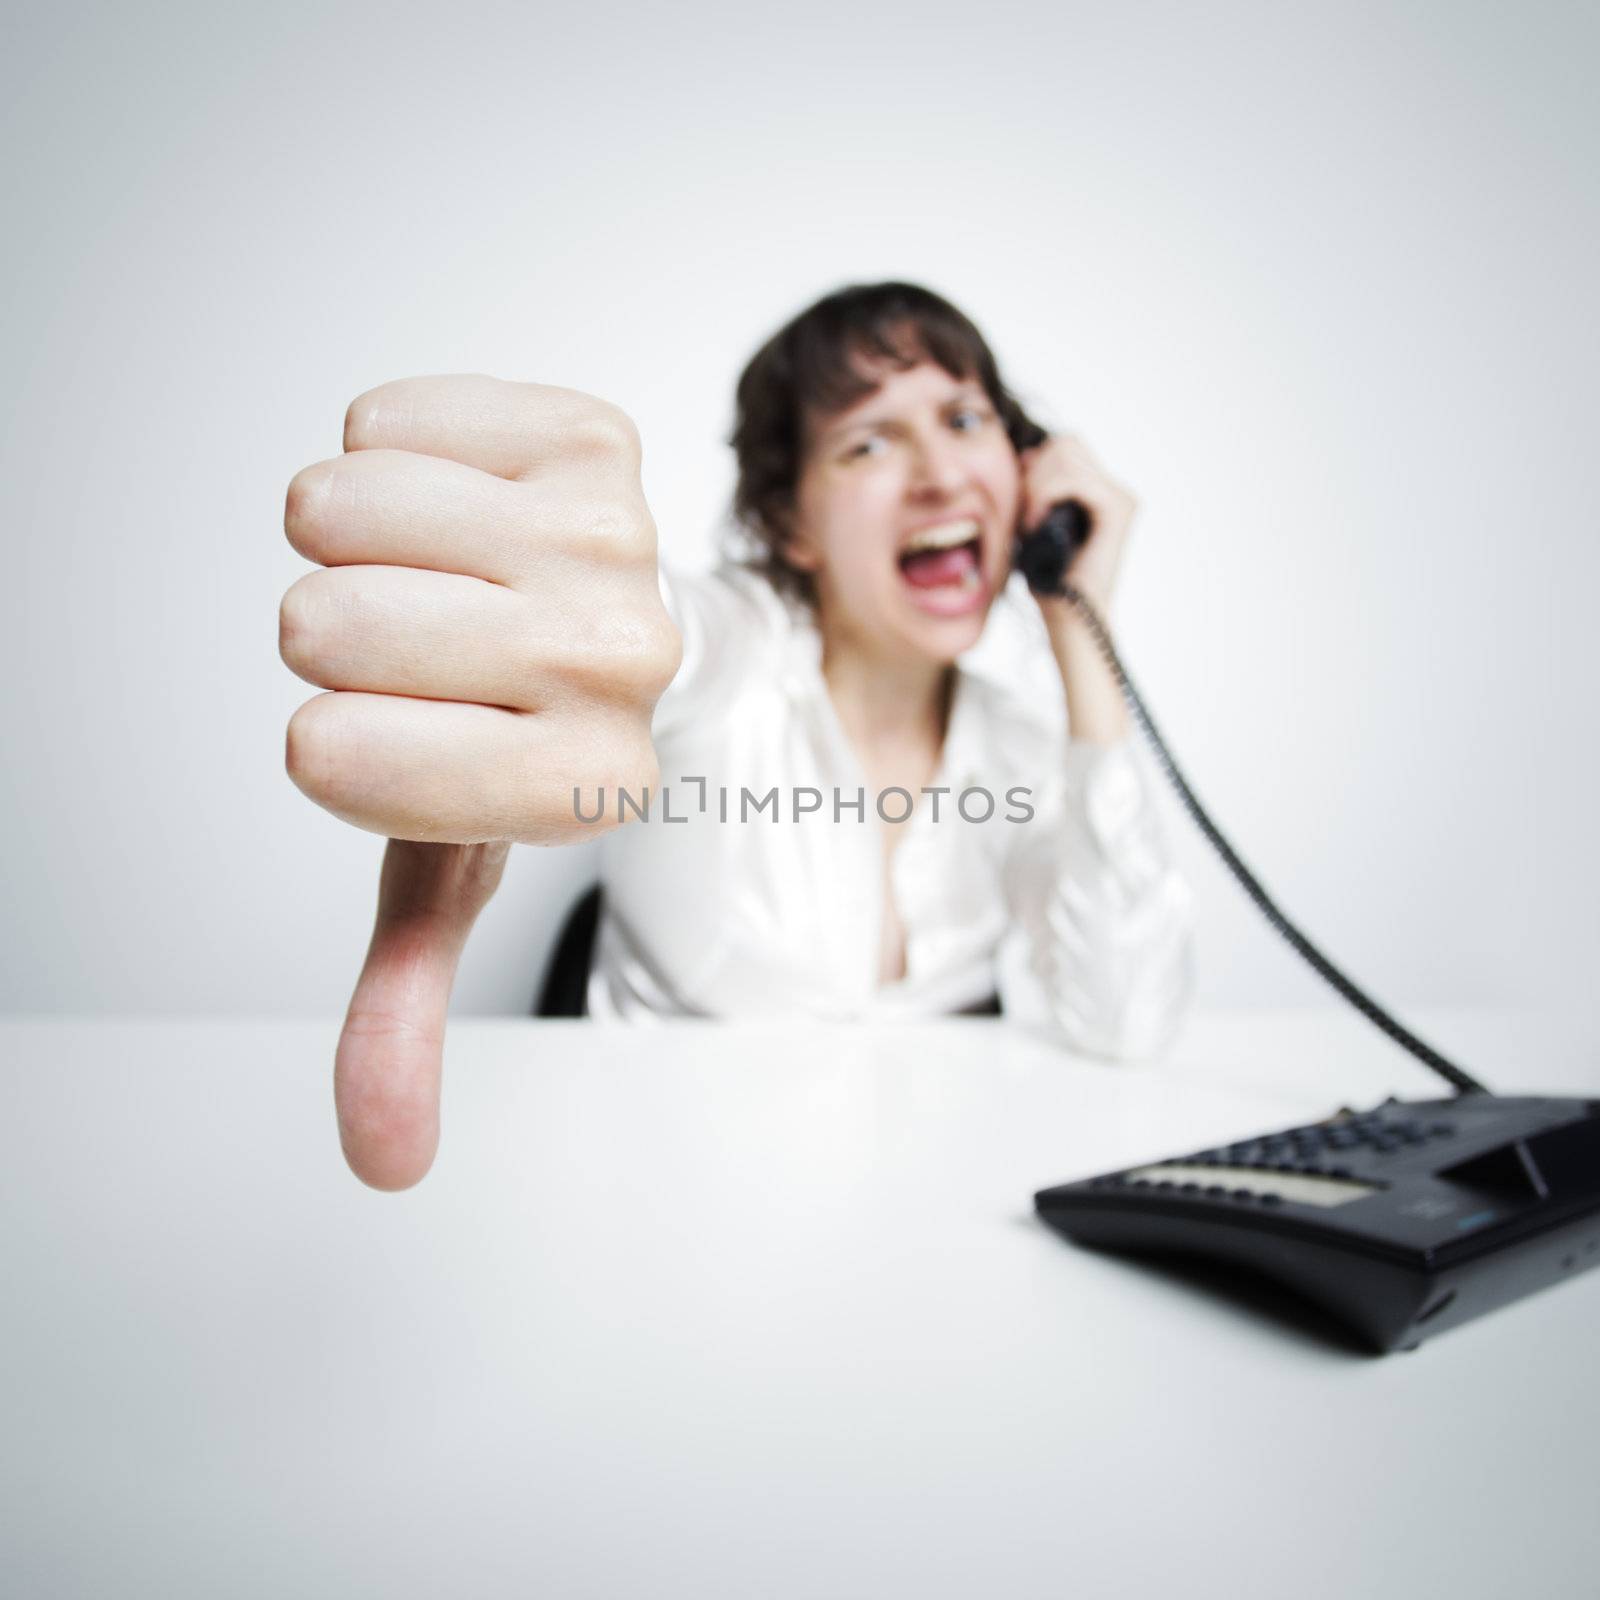 an hostile woman shows thumbs down against us (at the camera) while phoning at her office desk